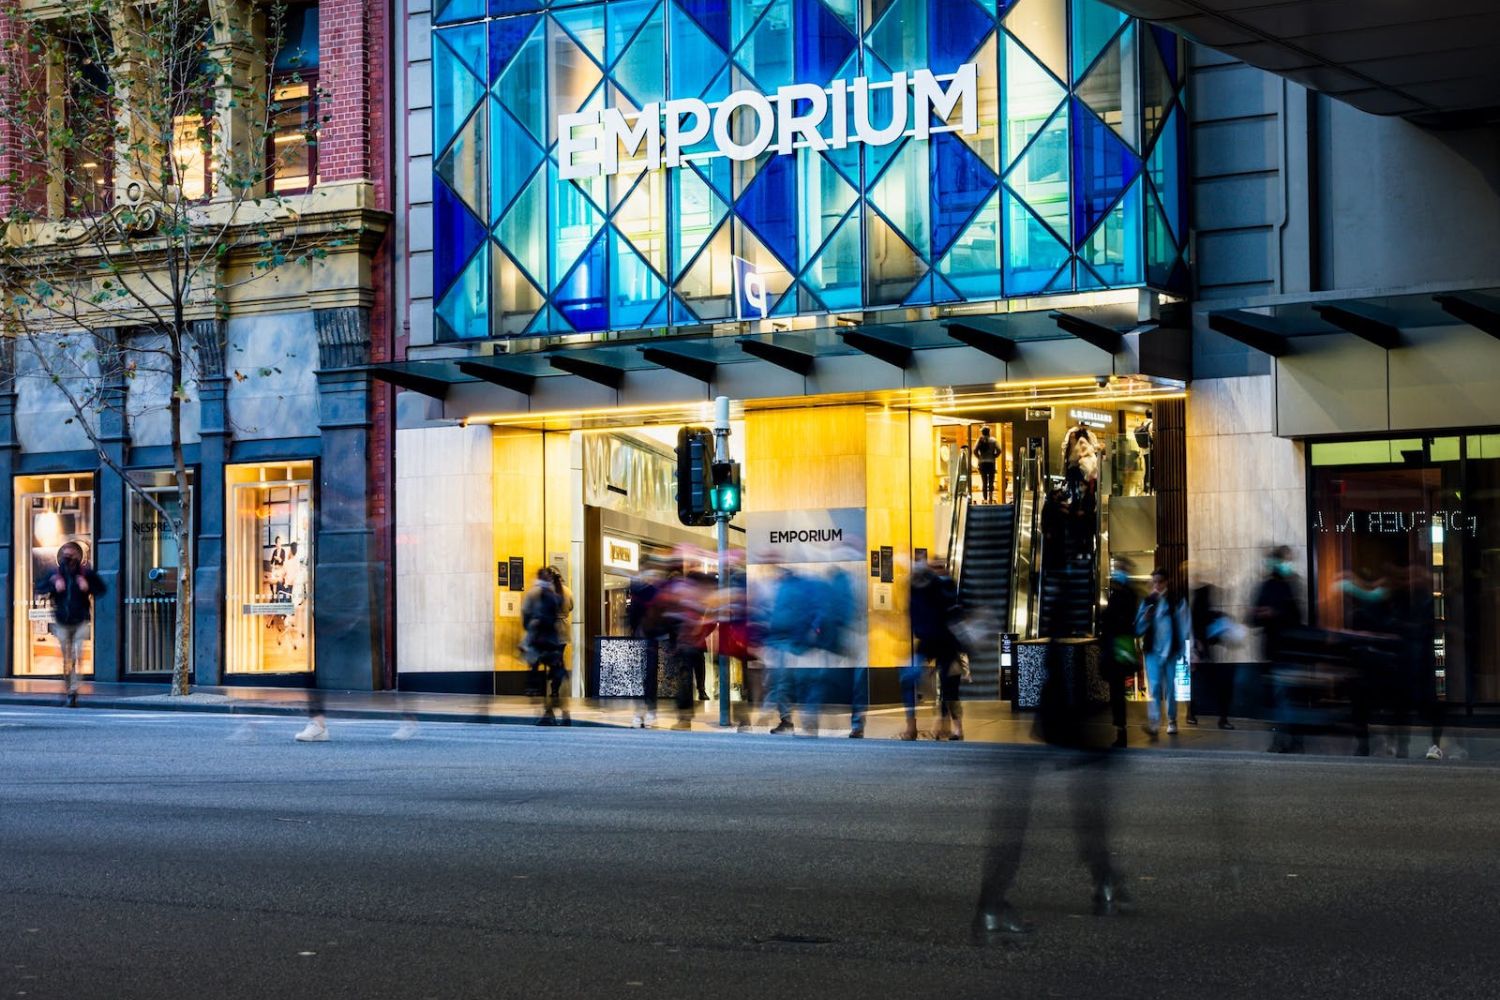 Get your fix of fashion, design and food at Emporium.